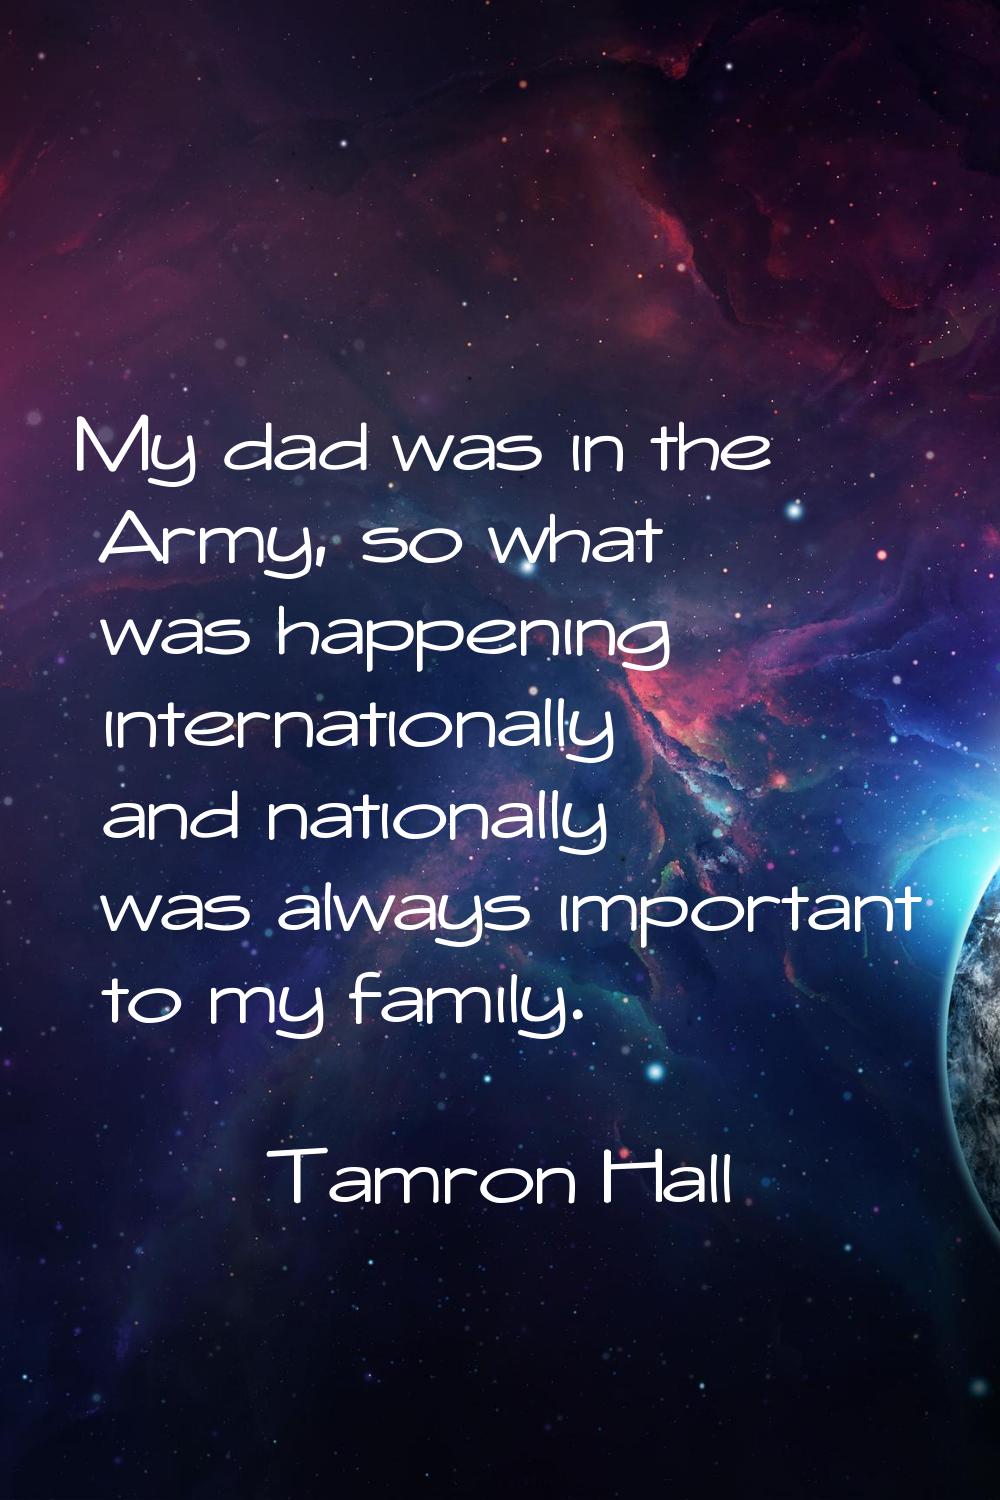 My dad was in the Army, so what was happening internationally and nationally was always important t